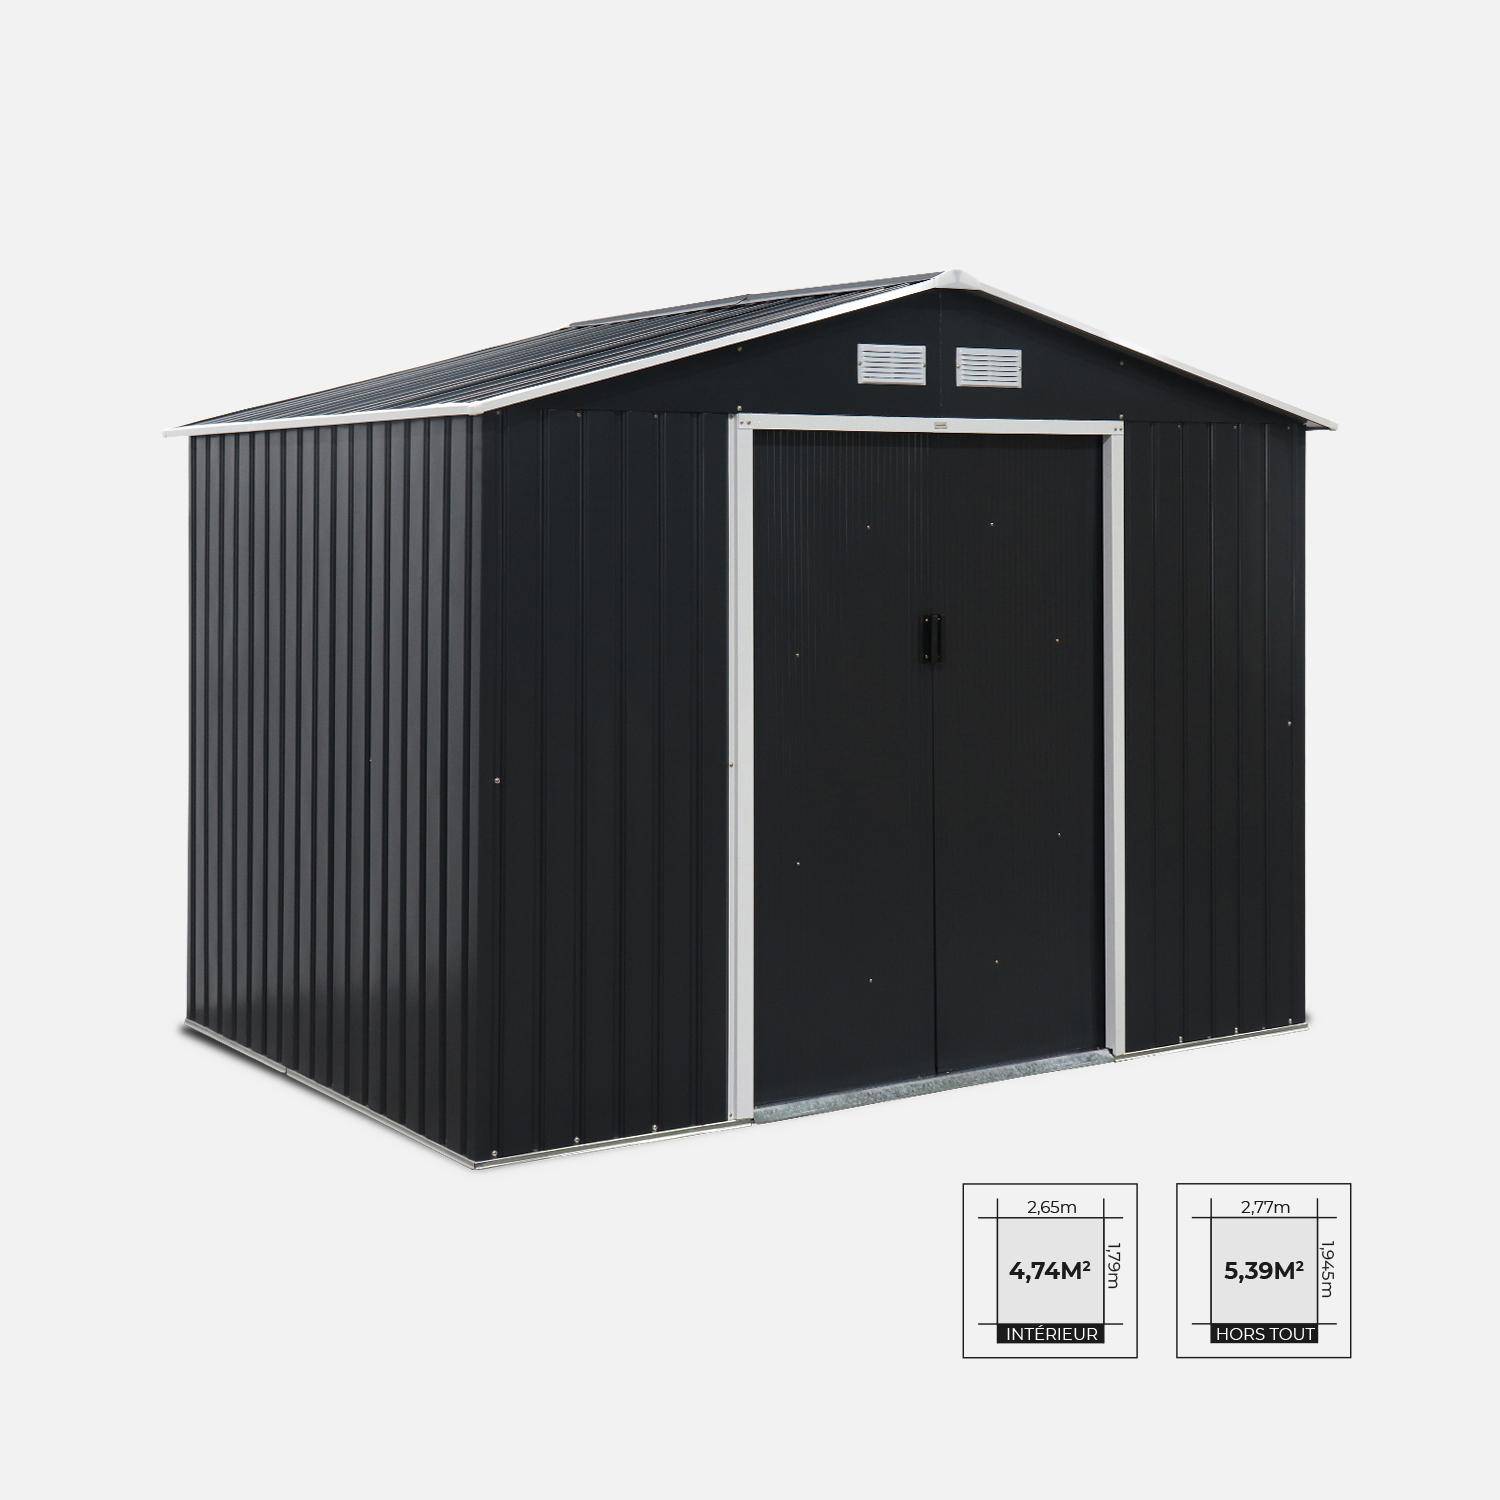 (9 X 6FT) 5.39m² Metal garden shed - Tool shed with single latch door, ground fixing kit supplied - Ferrain - Grey and White Photo3